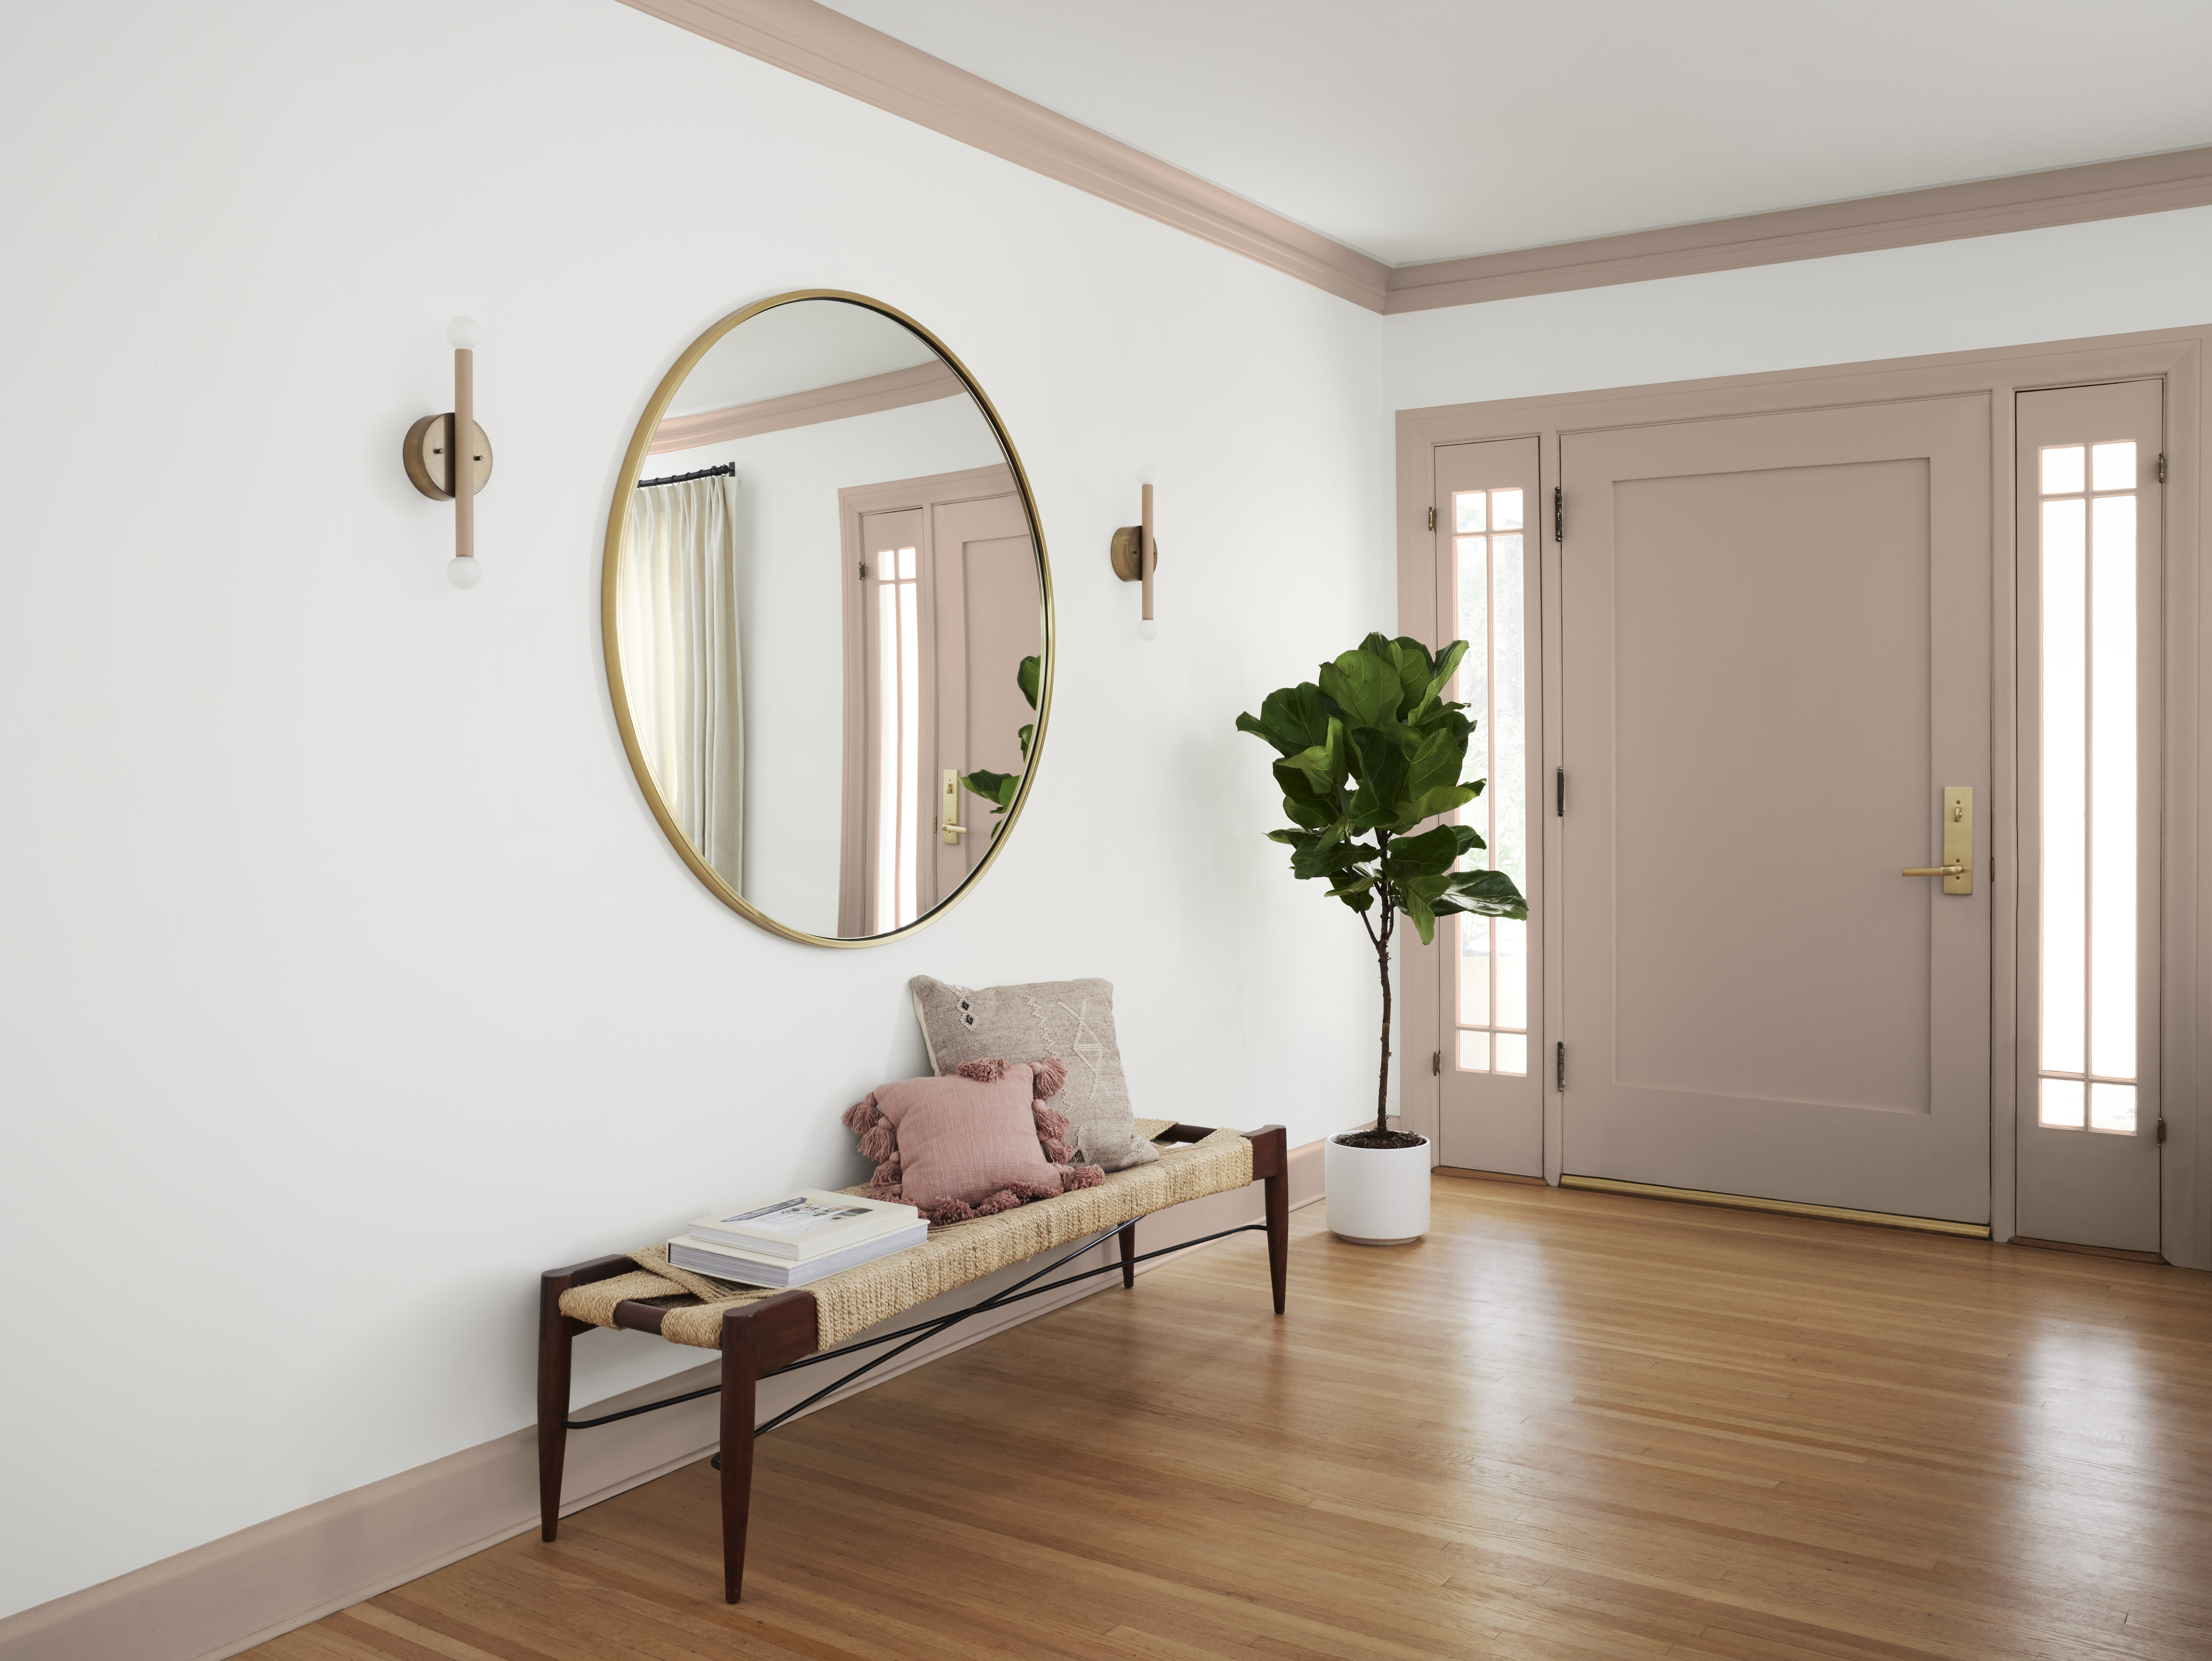 A spacious entryway with white walls and the door/trim painted in a taupe colour, styled with a round mirror, a bench, and a plant